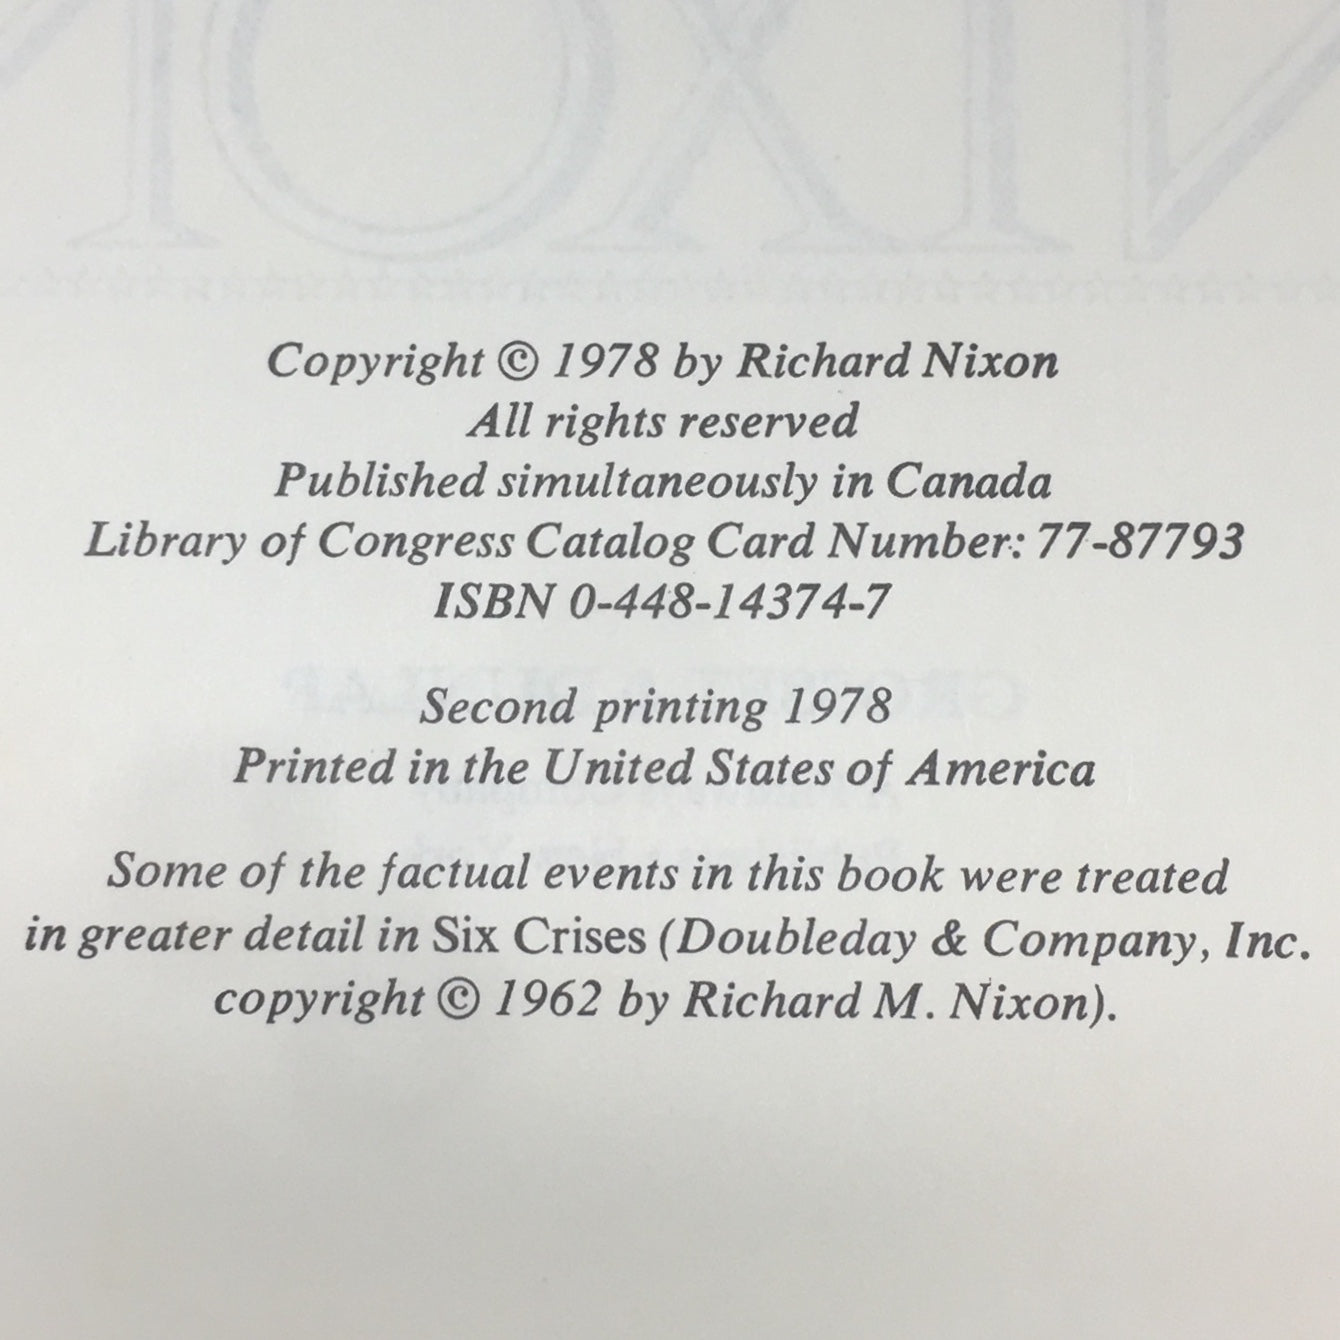 The Memoirs of Richard Nixon - Richard Nixon - Signed by Author - Second Printing - 1978